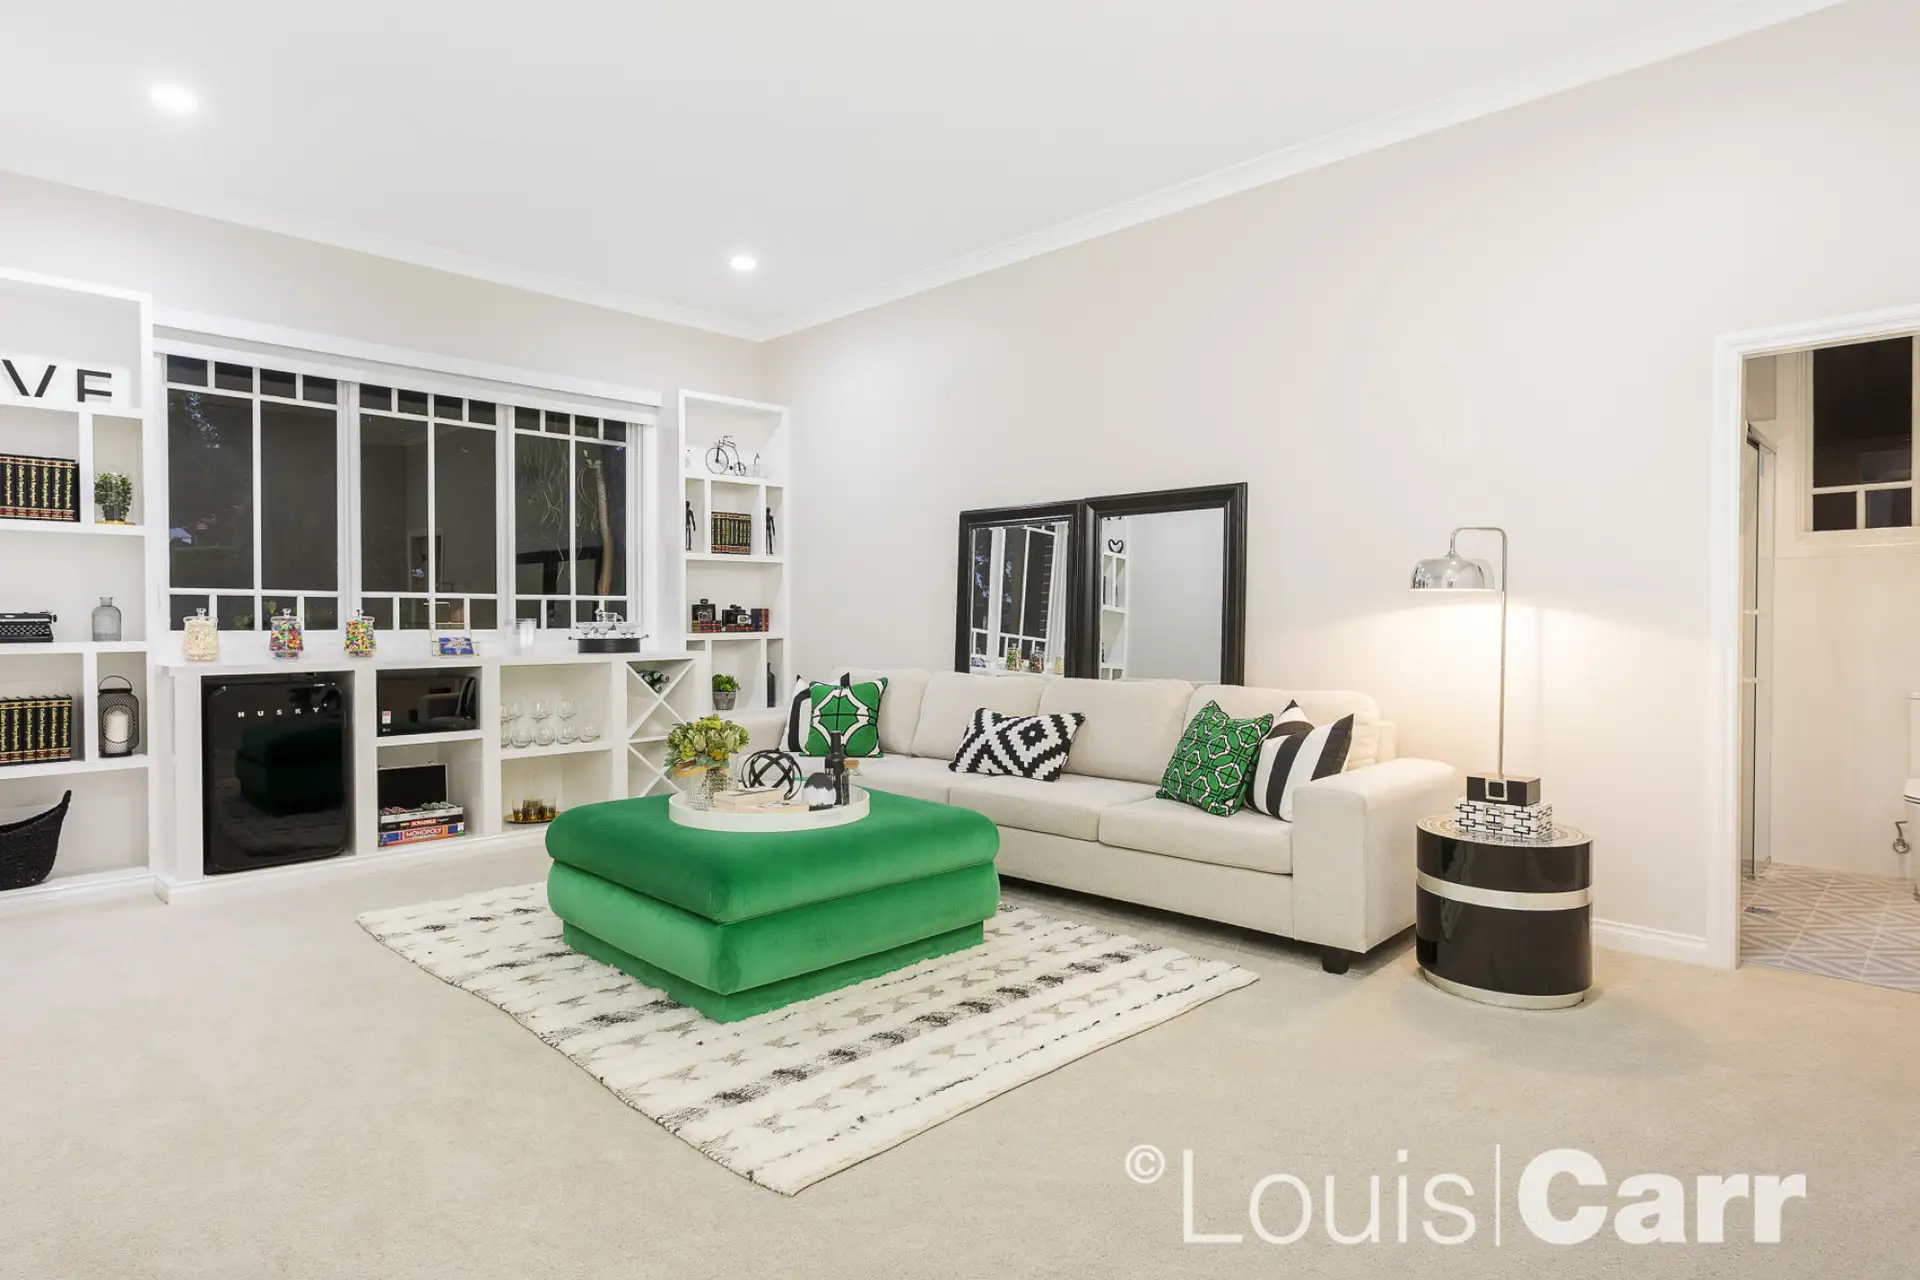 Photo #6: 11 Avonleigh Way, West Pennant Hills - Sold by Louis Carr Real Estate